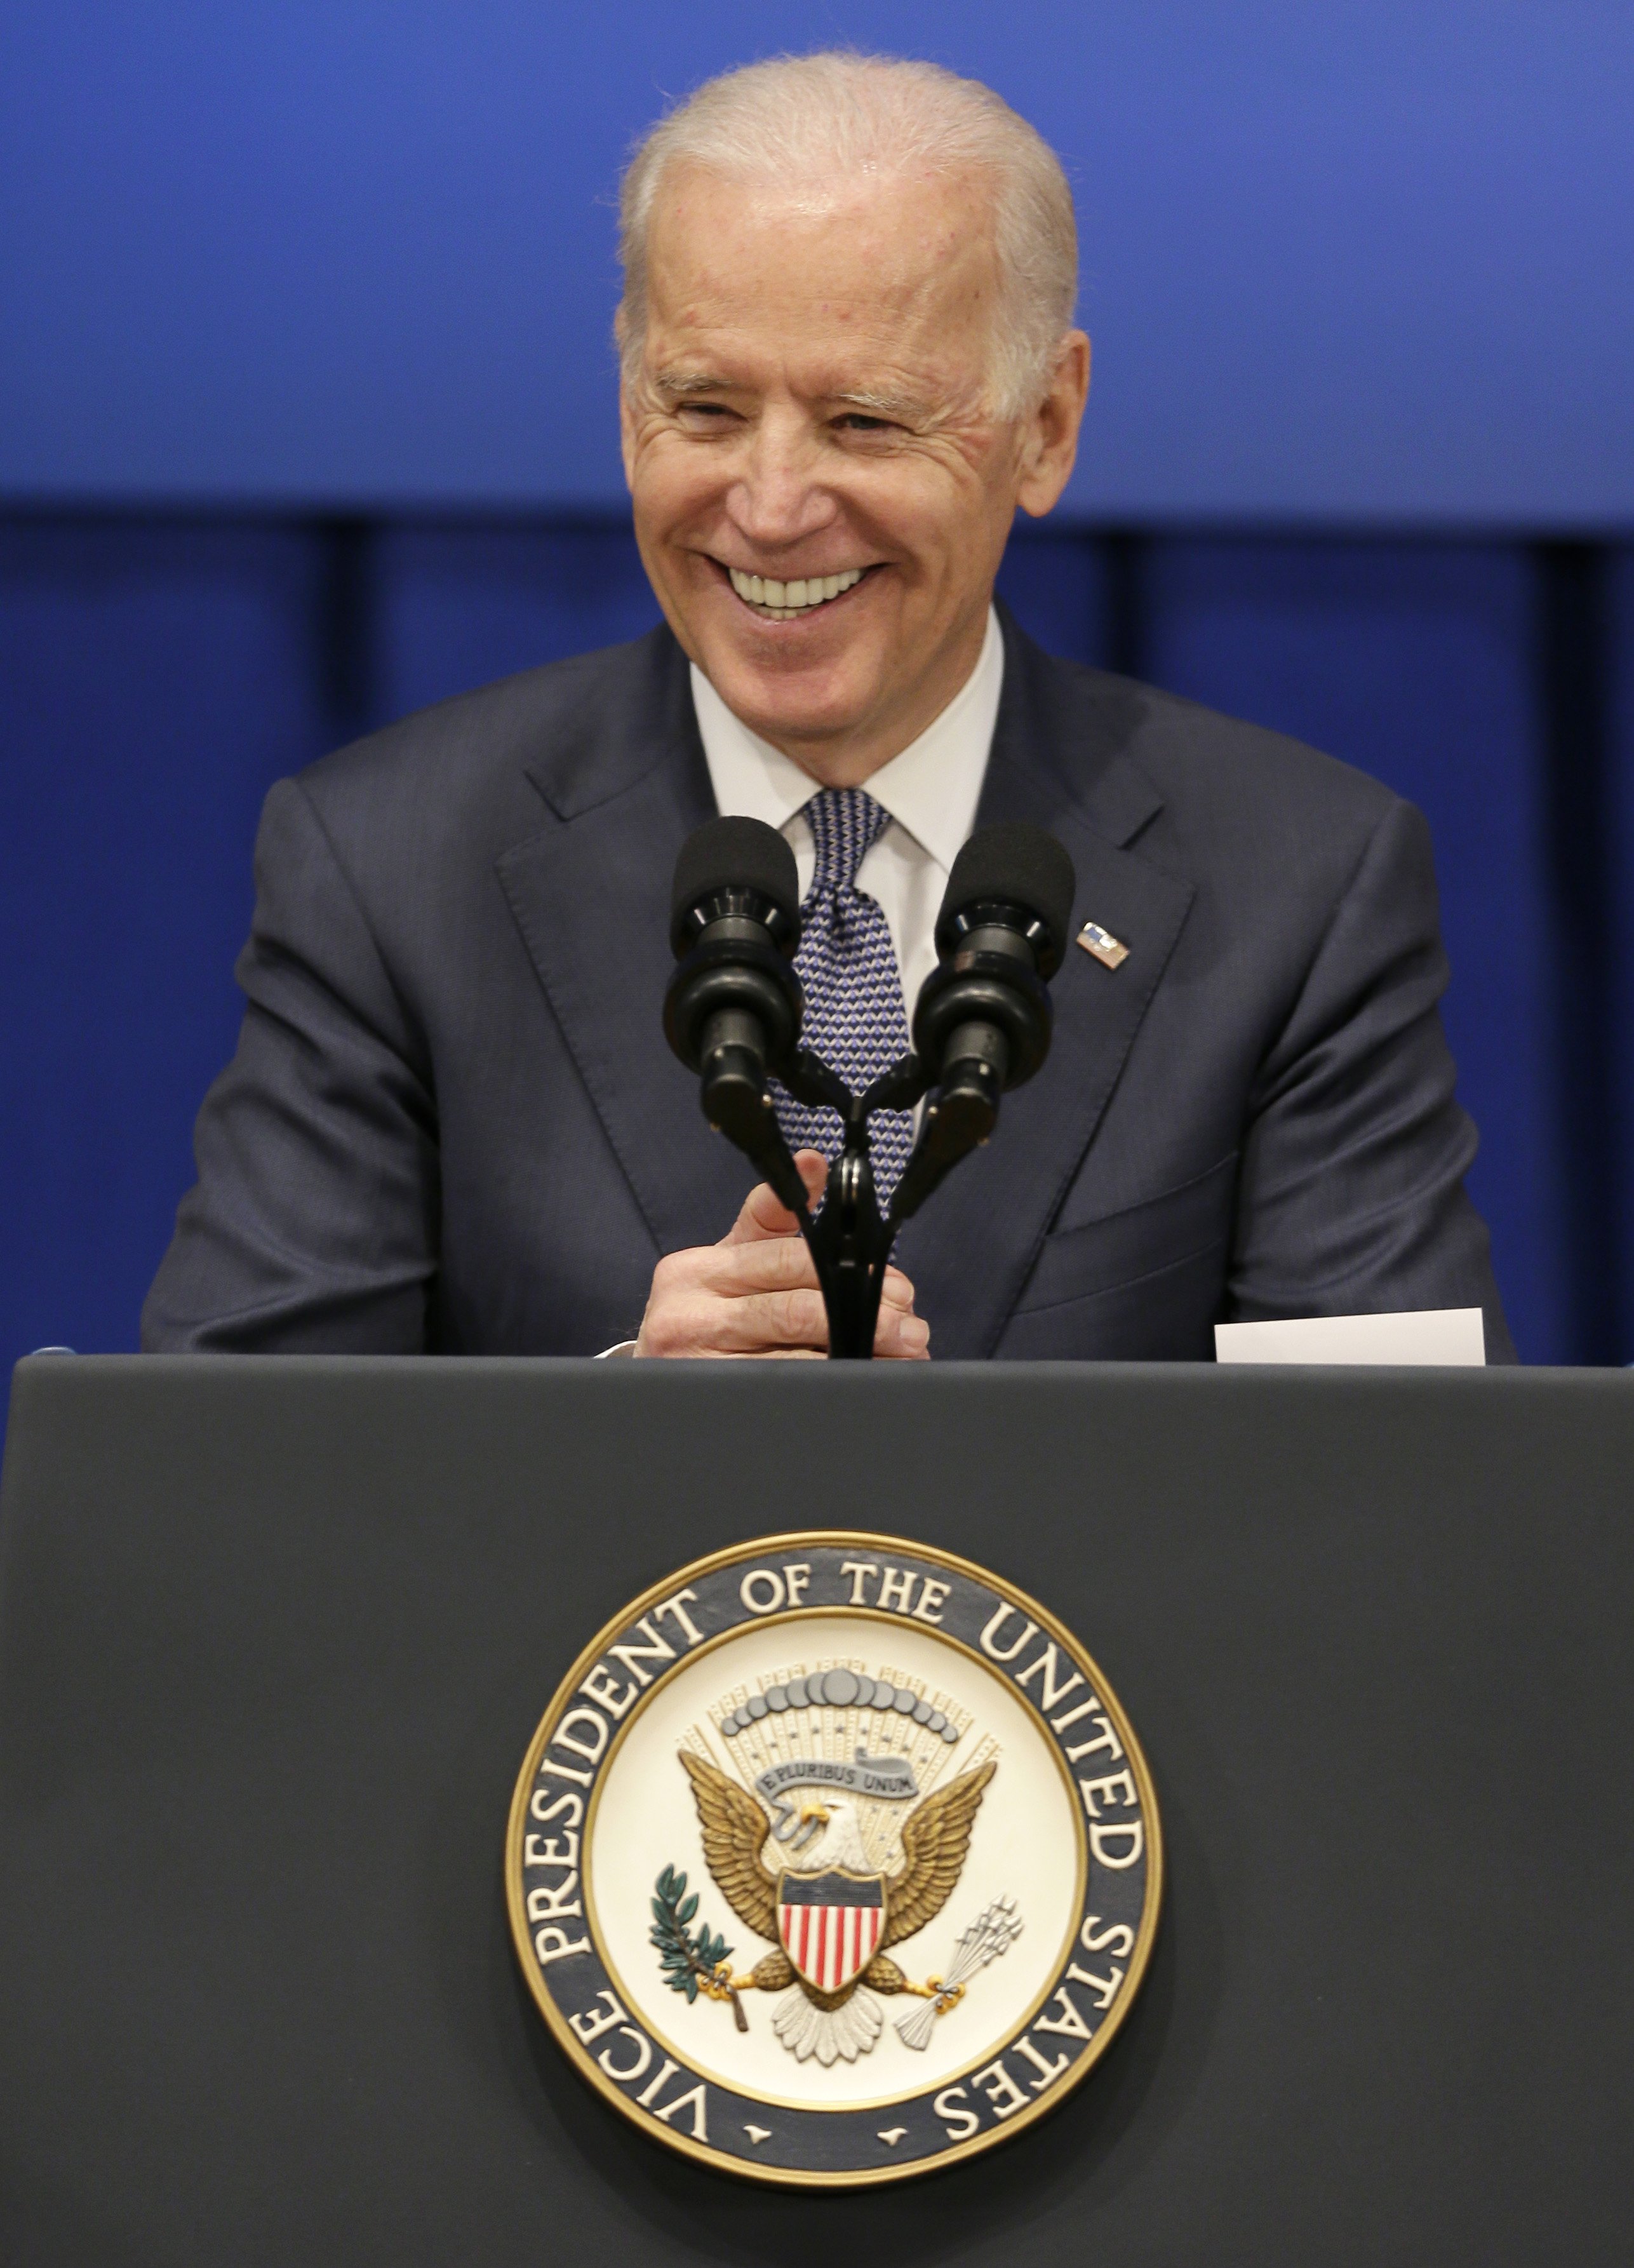 Vice President Joe Biden smiles as he speaks about the economy and the Obama administration's policies on Feb. 12, 2015, at Drake University in Des Moines, Iowa.